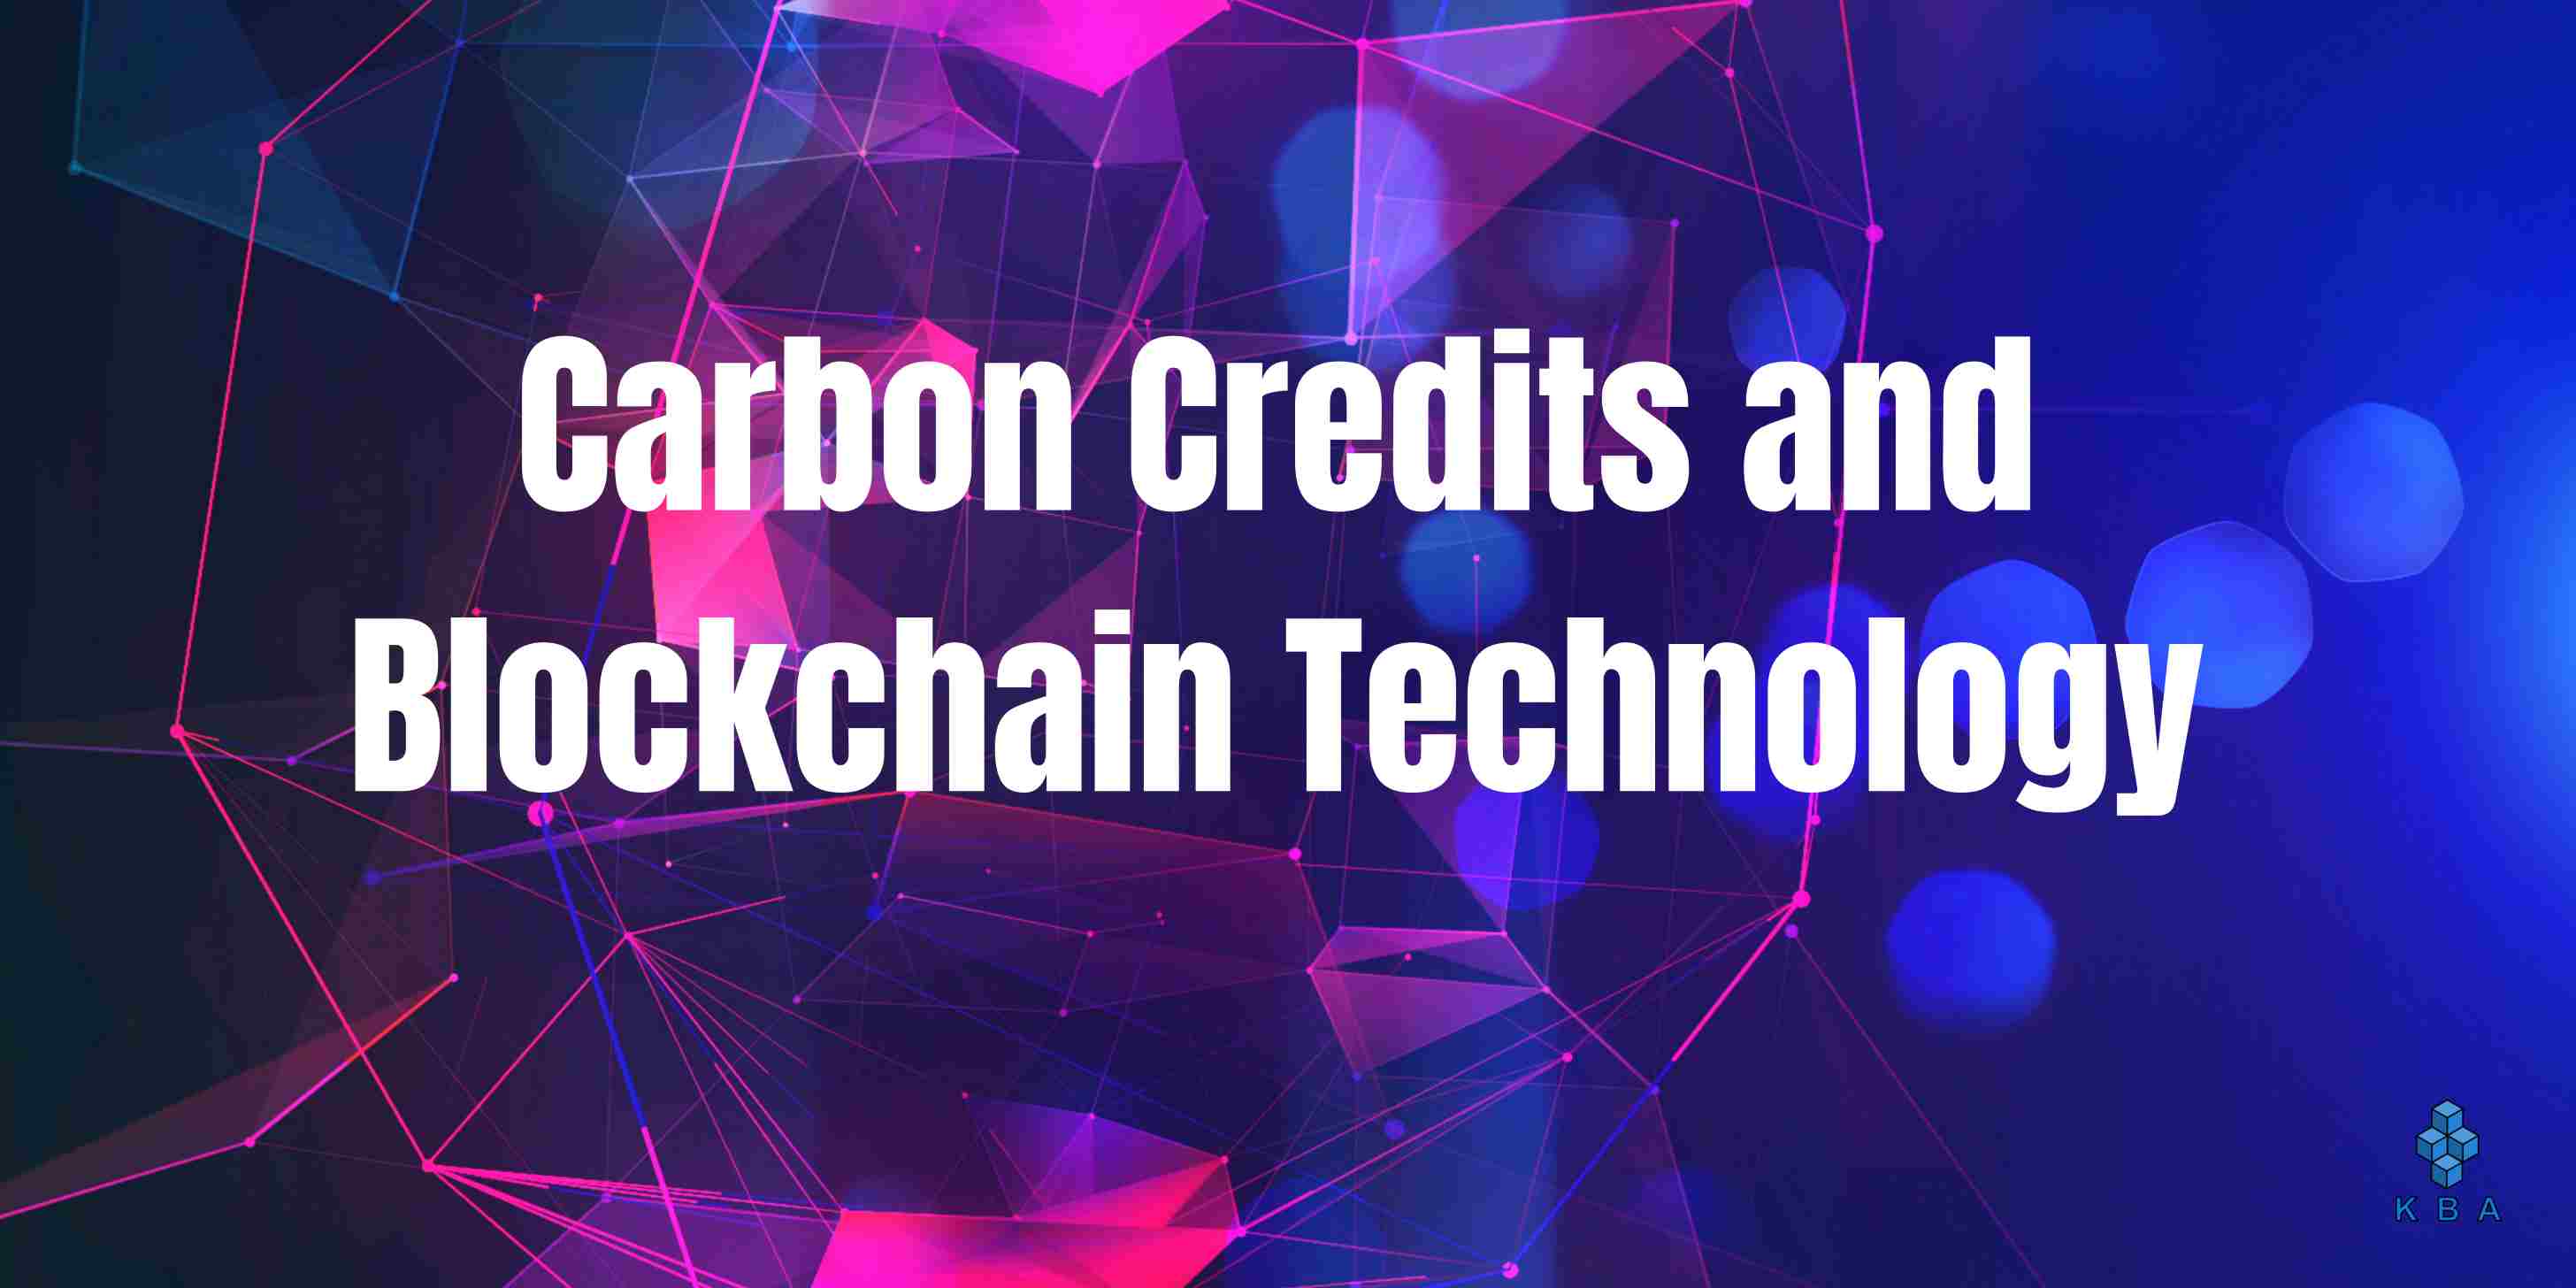  Carbon Credits and Blockchain Technology